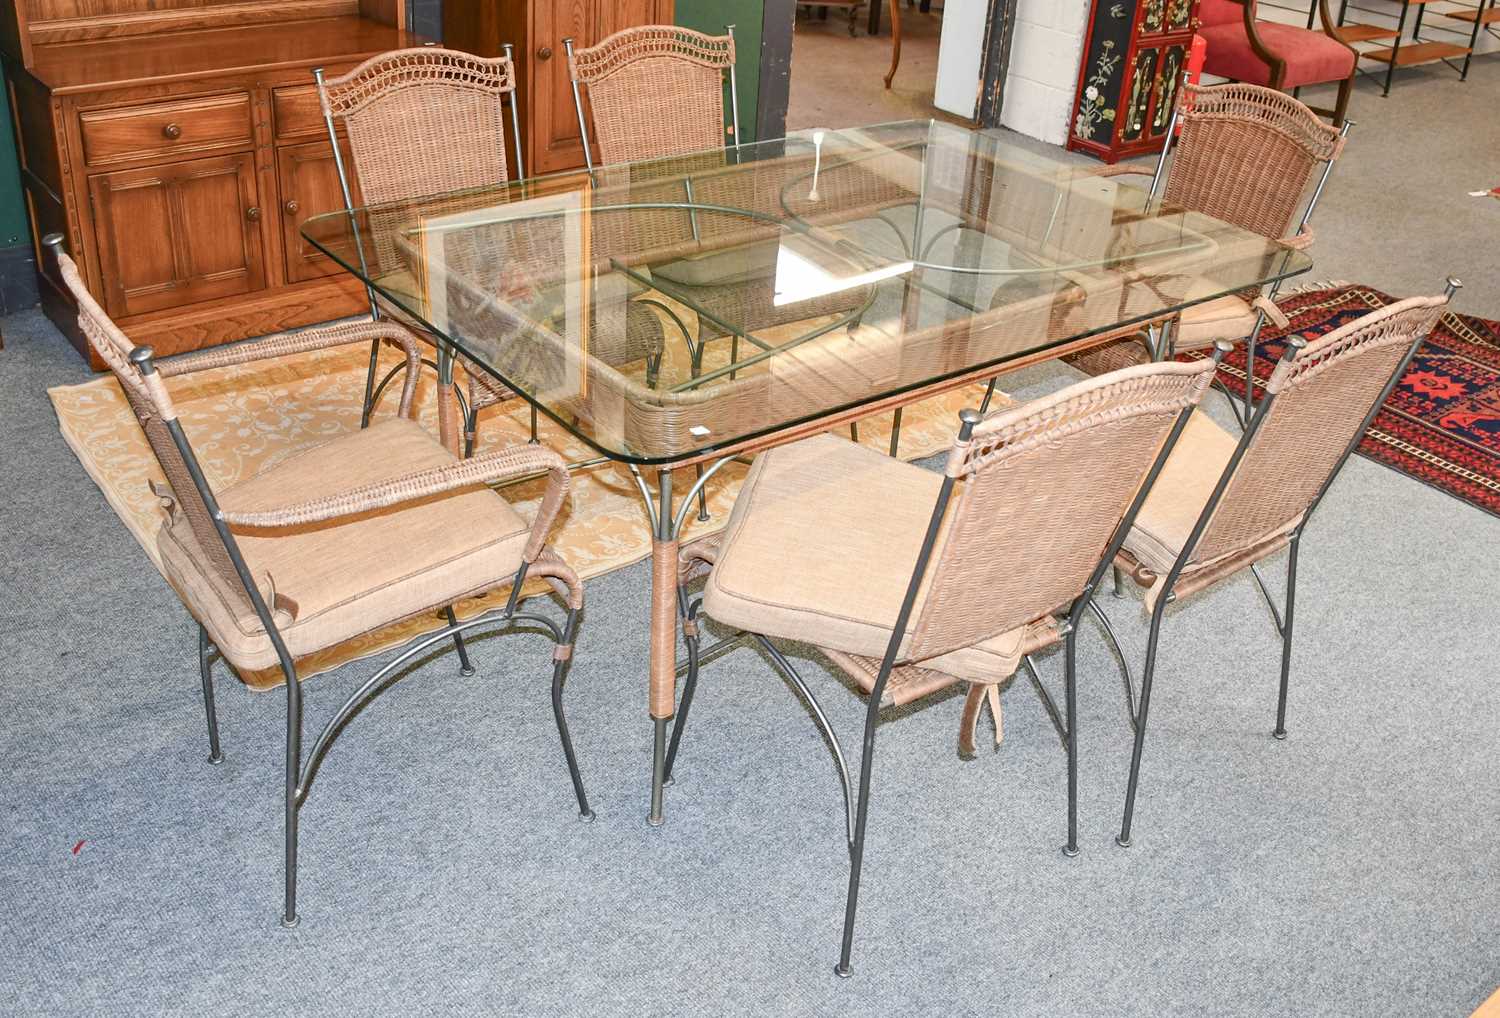 Modern Garden/Conservatory Furniture: a metal framed wicker three seater settee and matching - Image 2 of 2